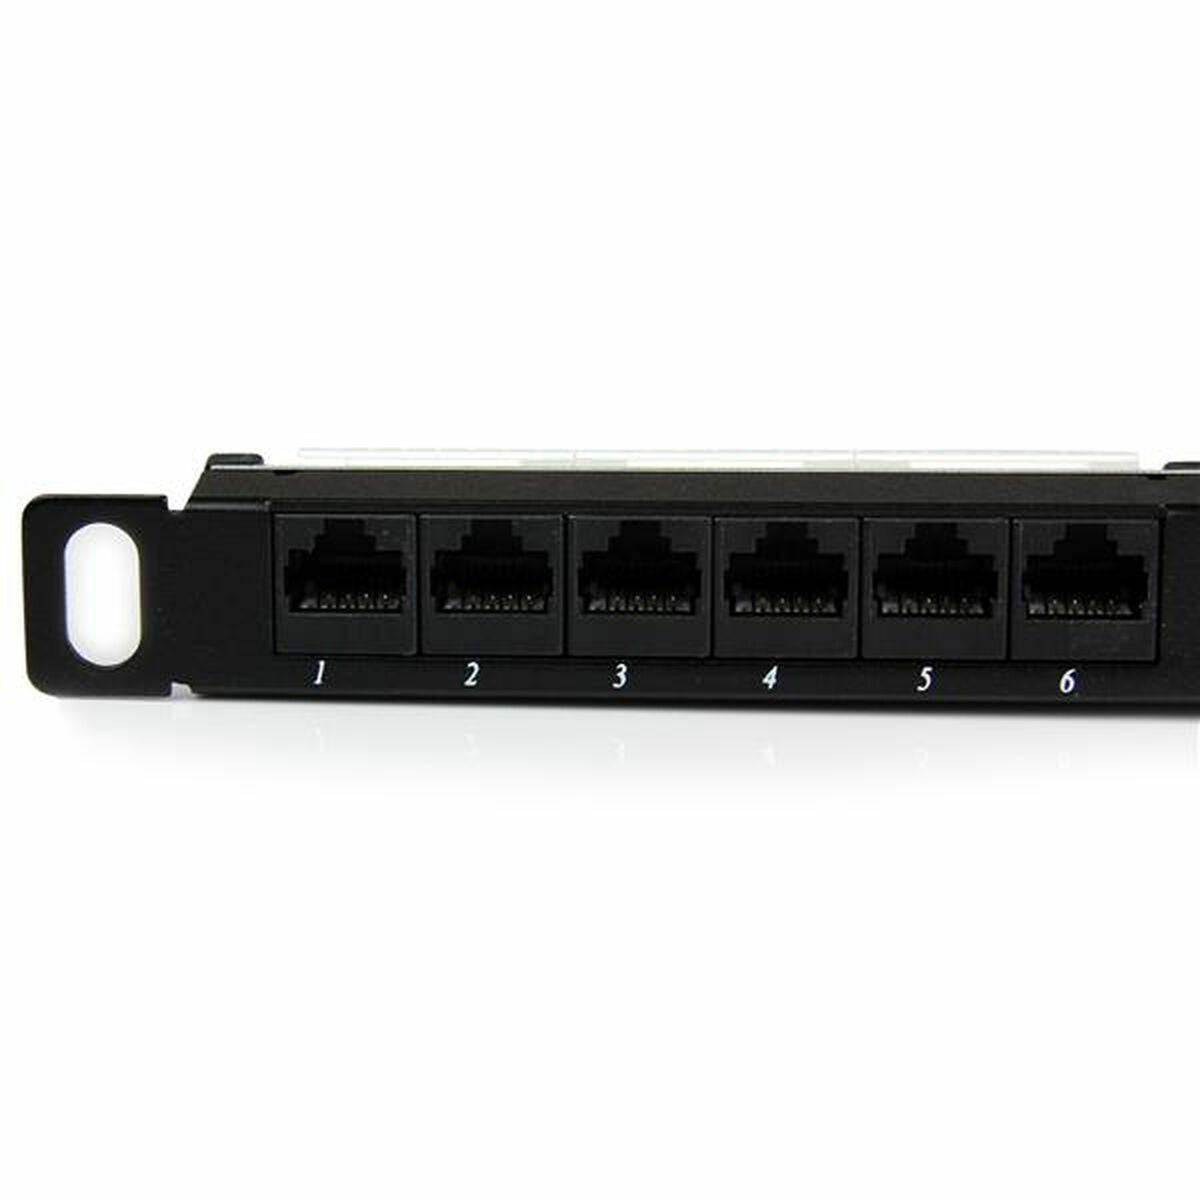 24-port UTP Category 5e Patch Panel Startech PANELHU24, Startech, Computing, Network devices, 24-port-utp-category-5e-patch-panel-startech-panelhu24, Brand_Startech, category-reference-2609, category-reference-2803, category-reference-2827, category-reference-t-19685, category-reference-t-19914, Condition_NEW, networks/wiring, Price_50 - 100, Teleworking, RiotNook